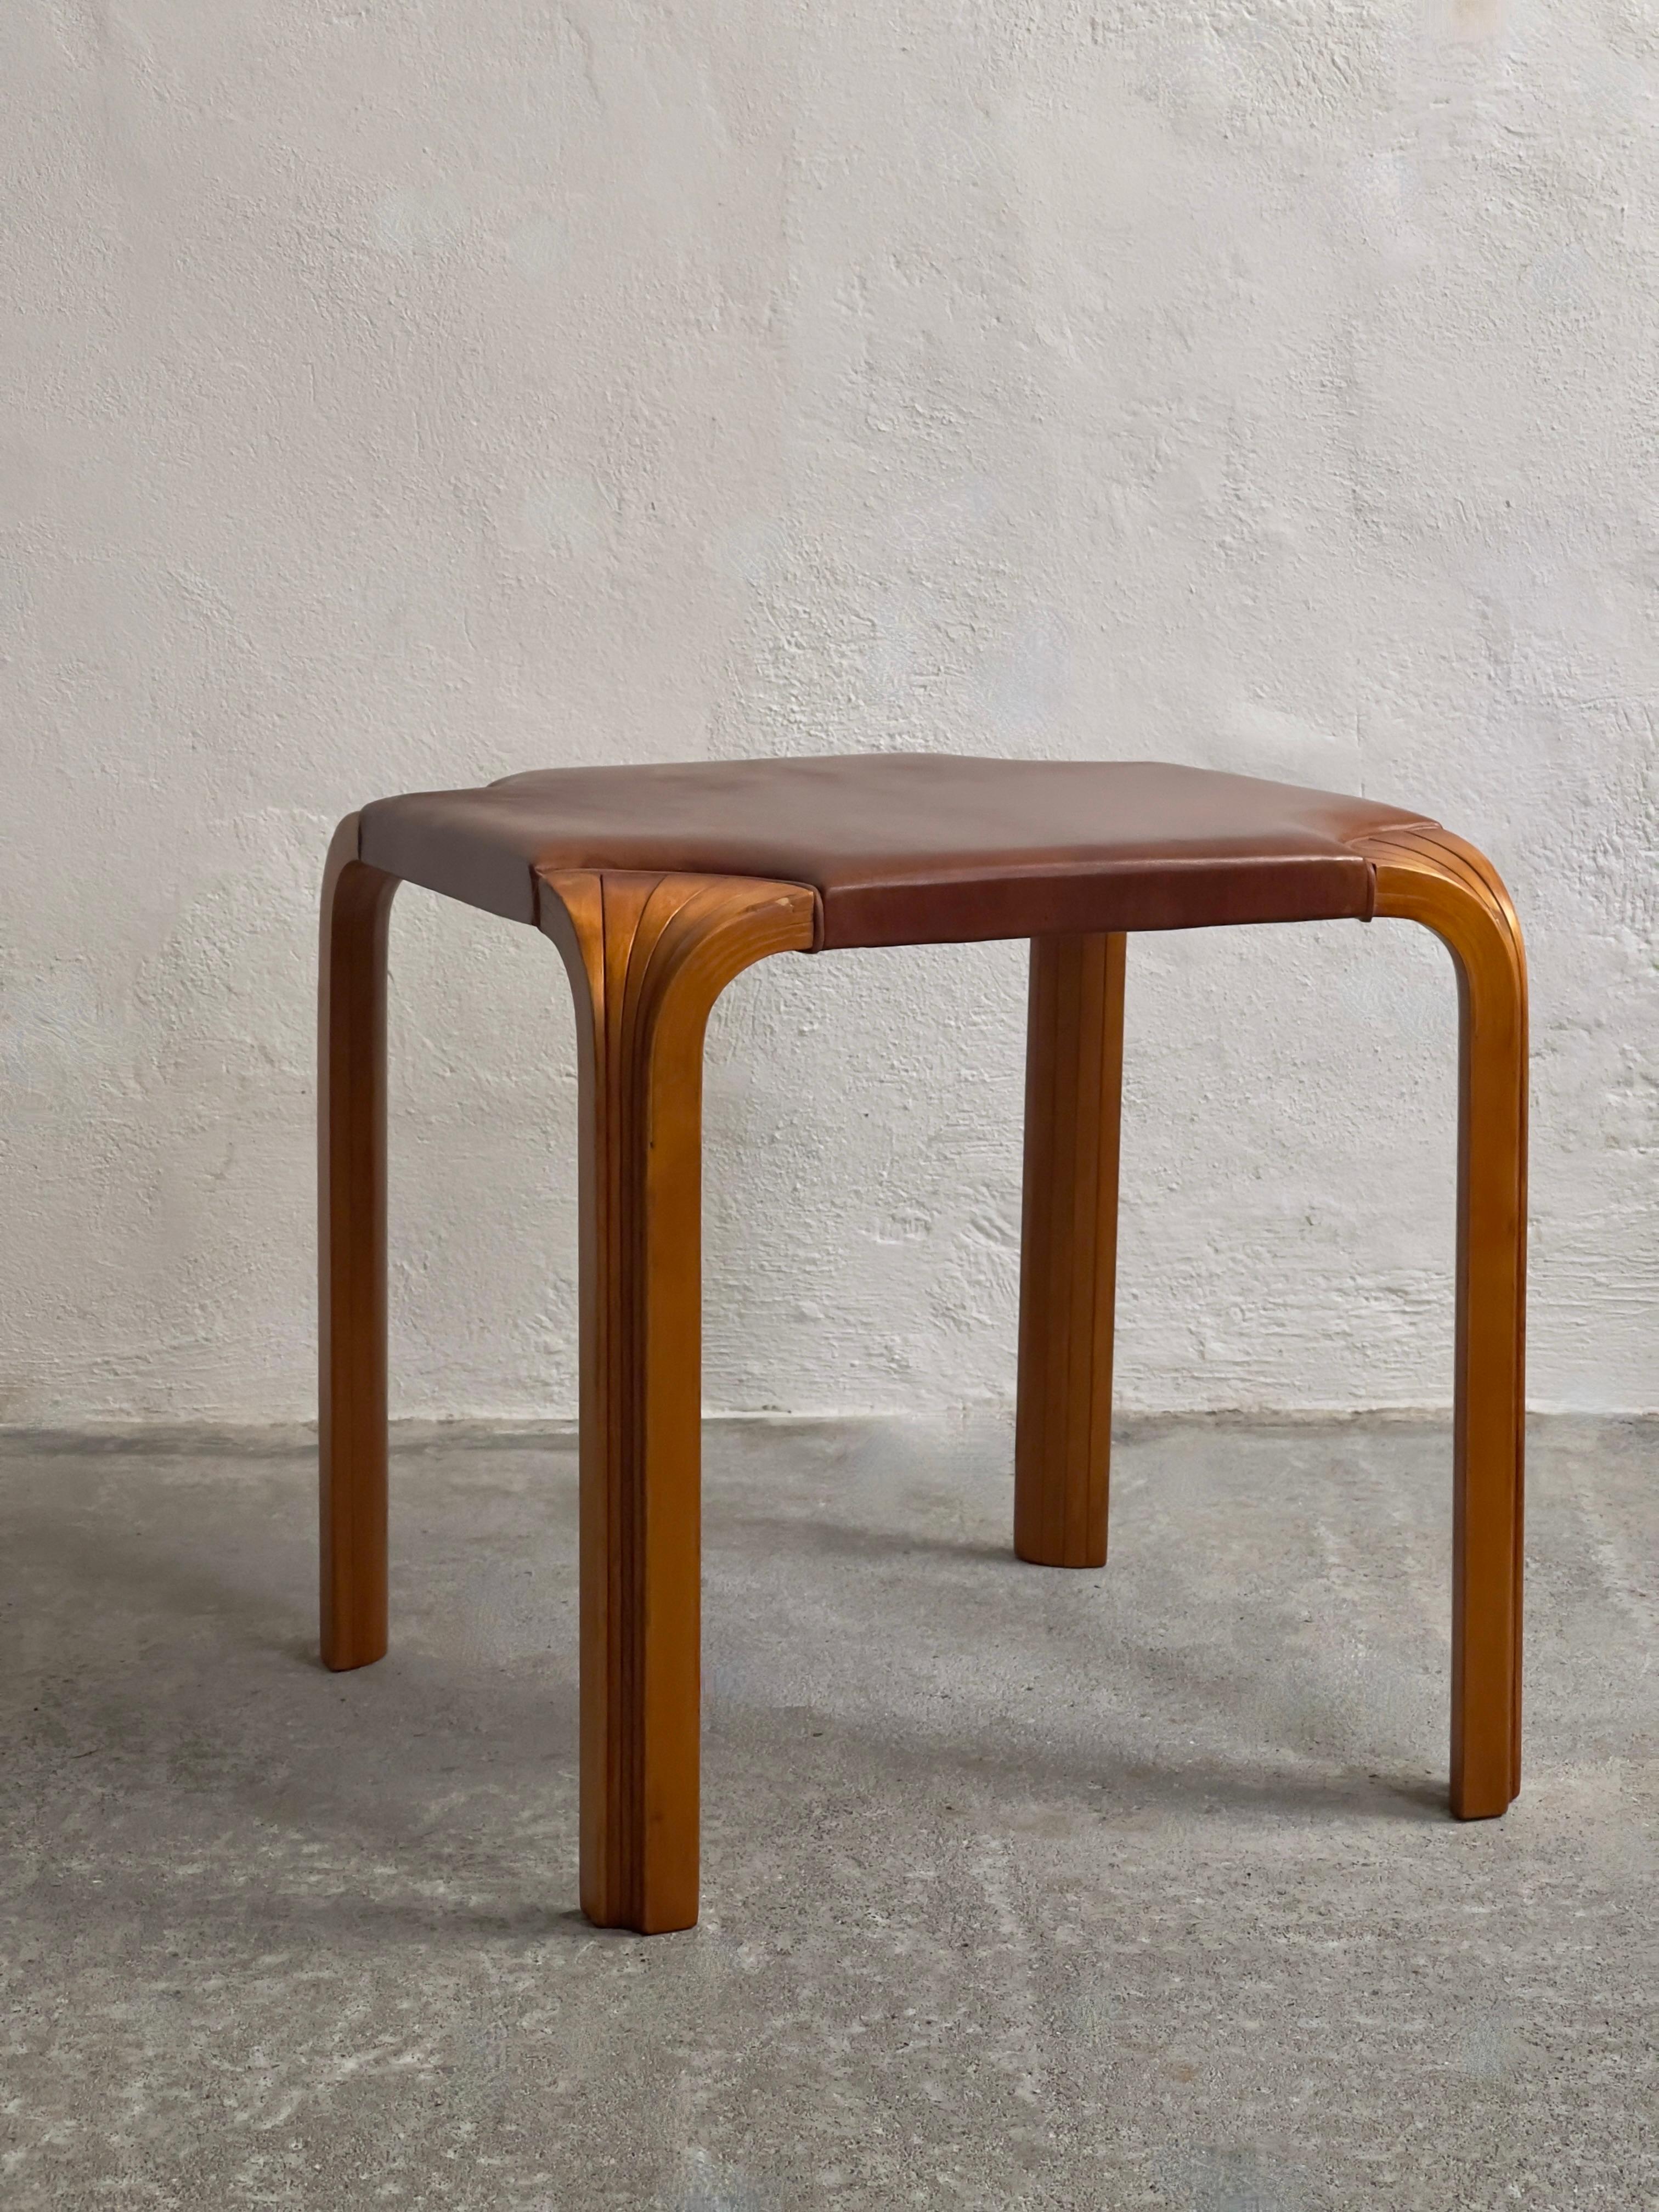 1954 Alvar Aalto stool model X601 in rich patinated birch and Niger leather For Sale 1